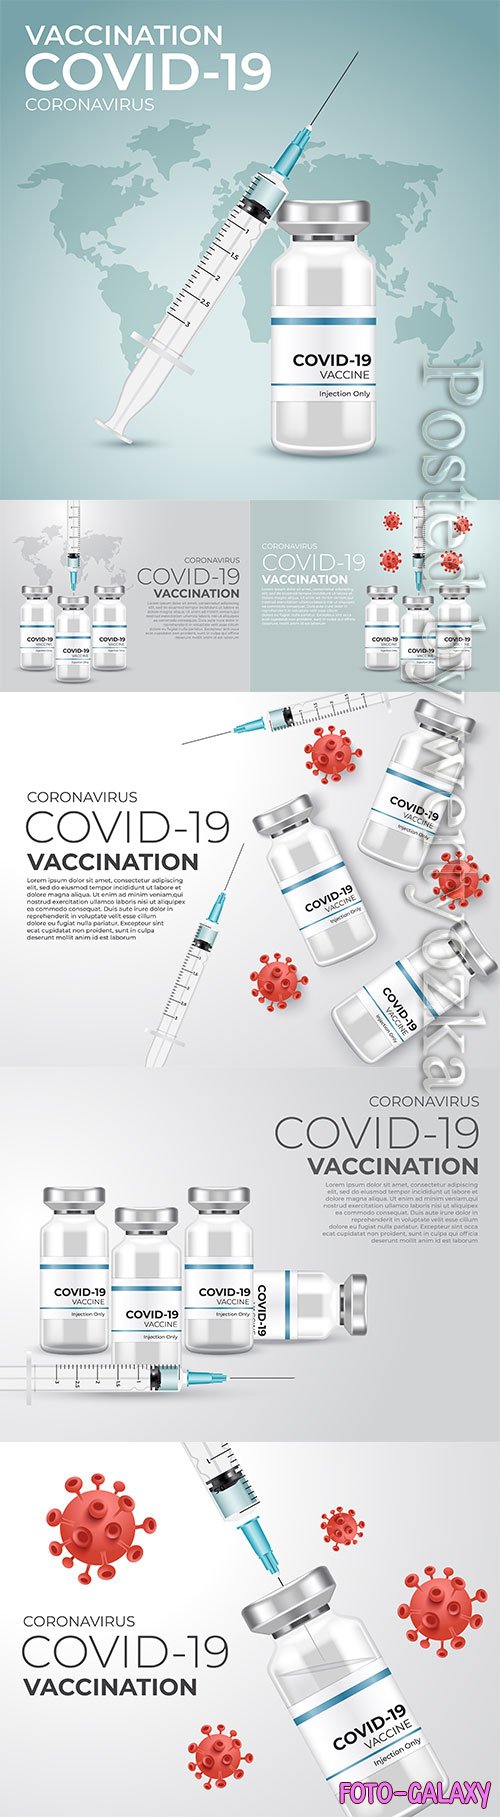 Covid 19 corona virus vaccination with vaccine bottle and syringe injection